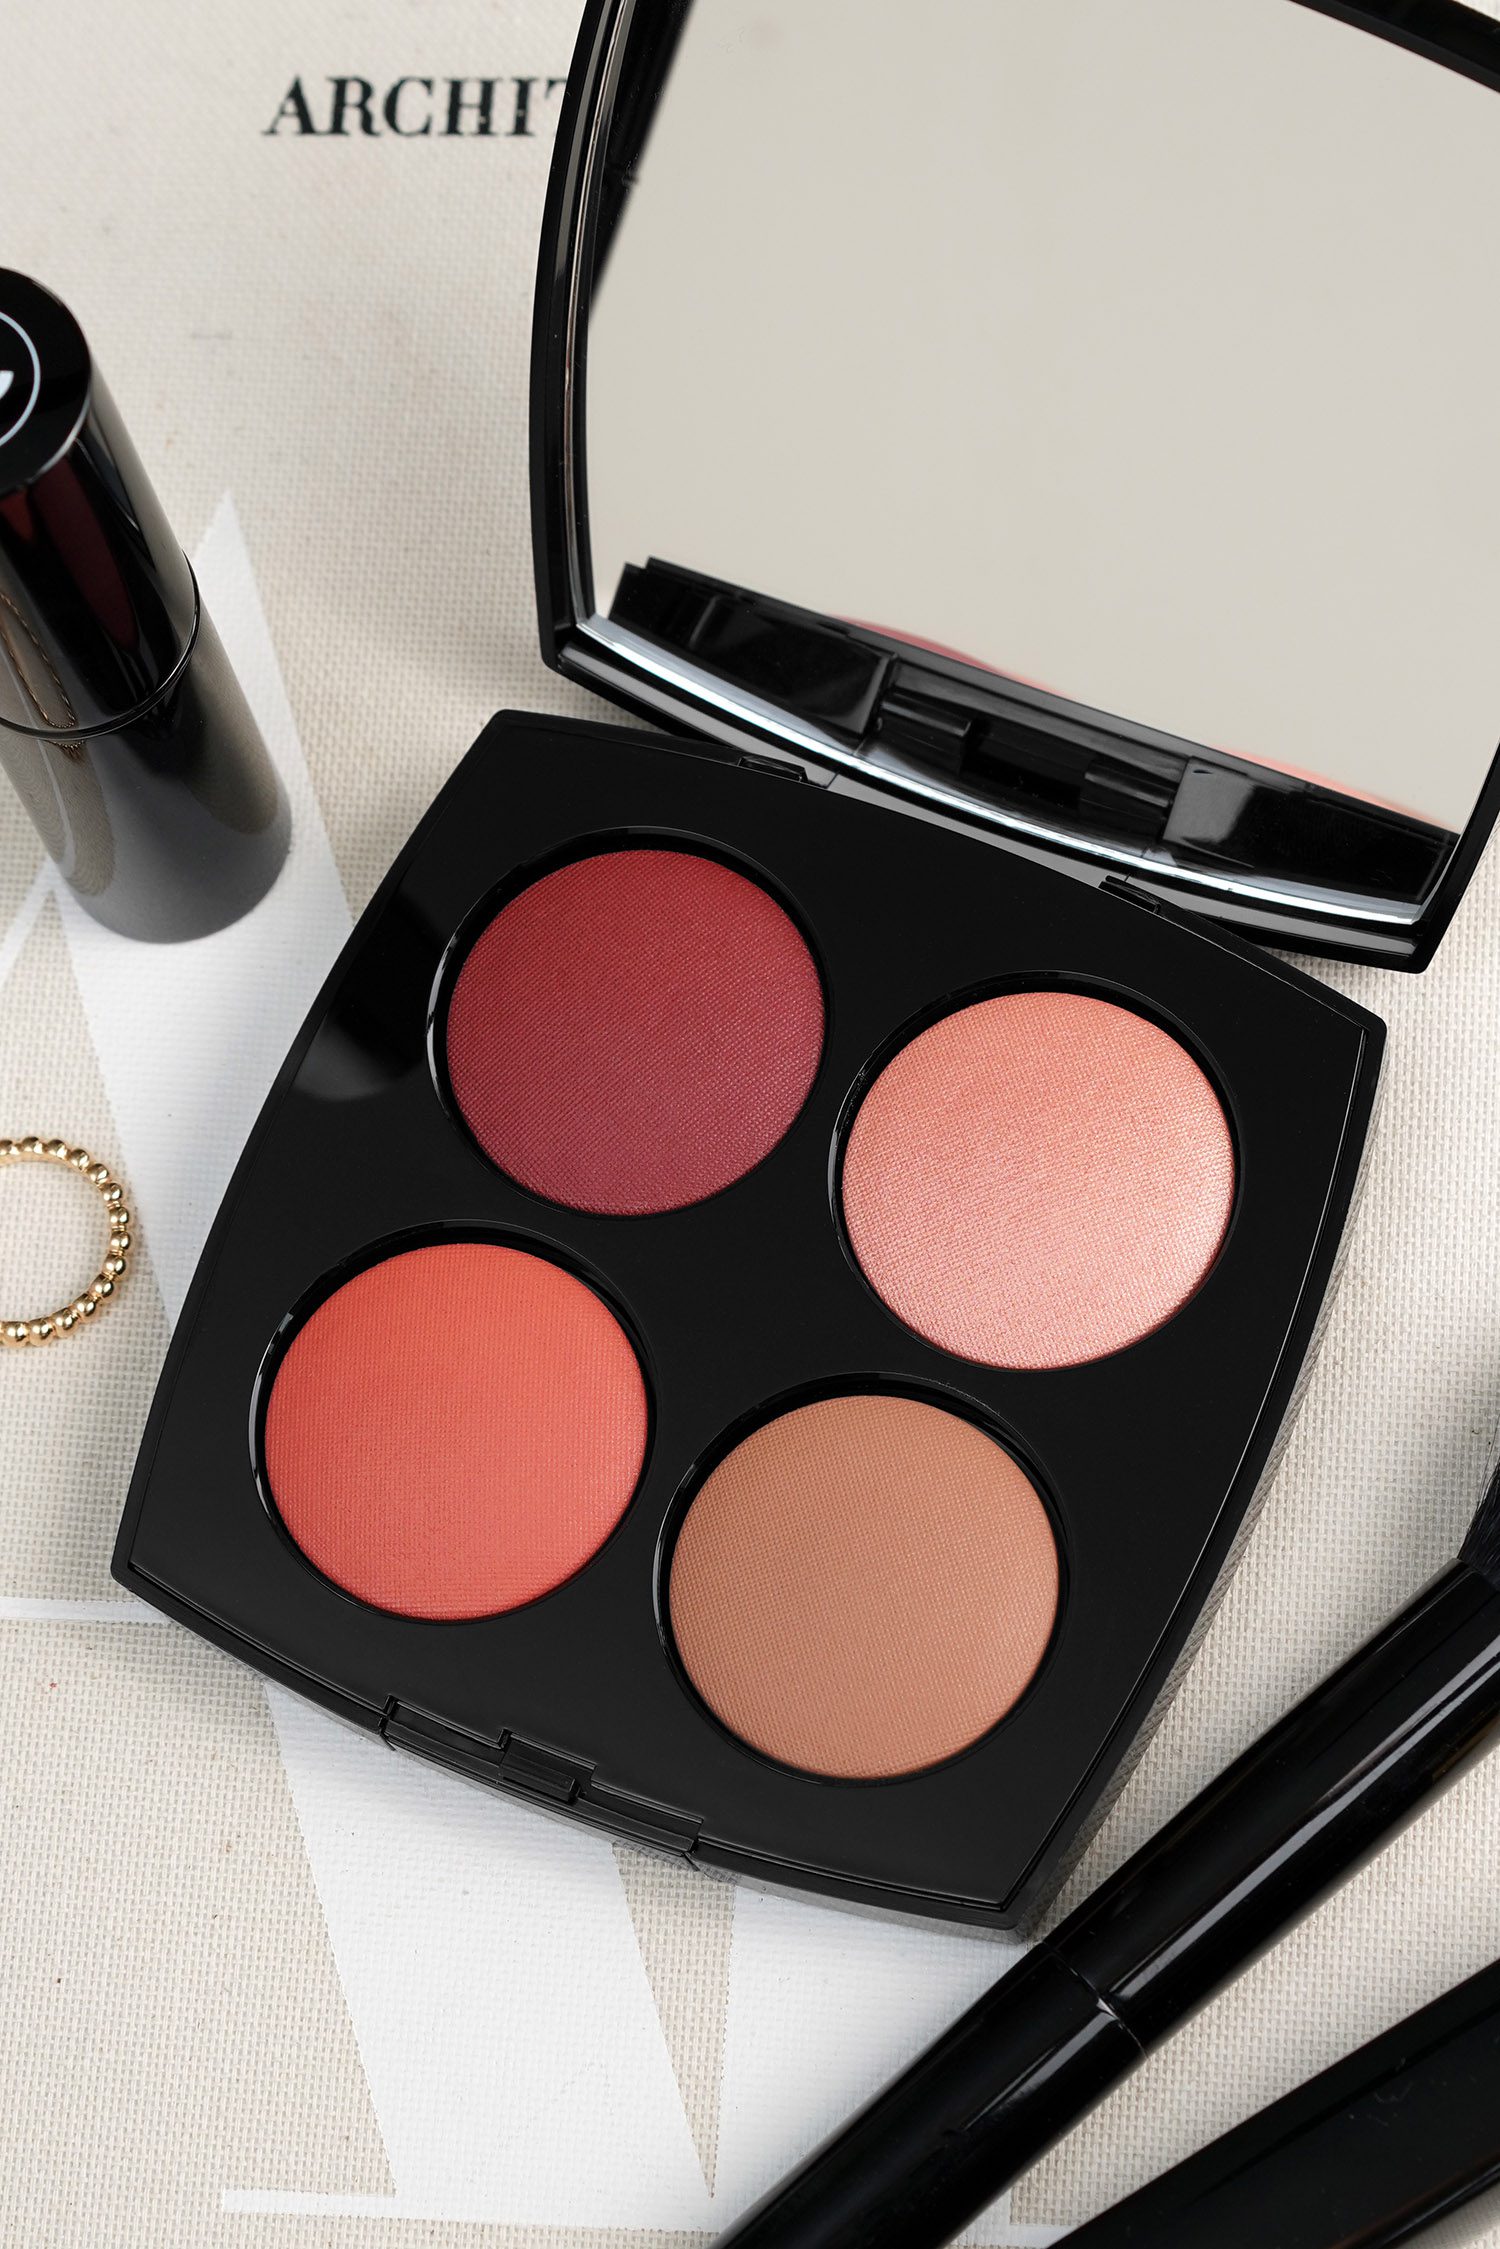 CHANEL Les 4 Rouge Yeux Joues Palette in Tendresse